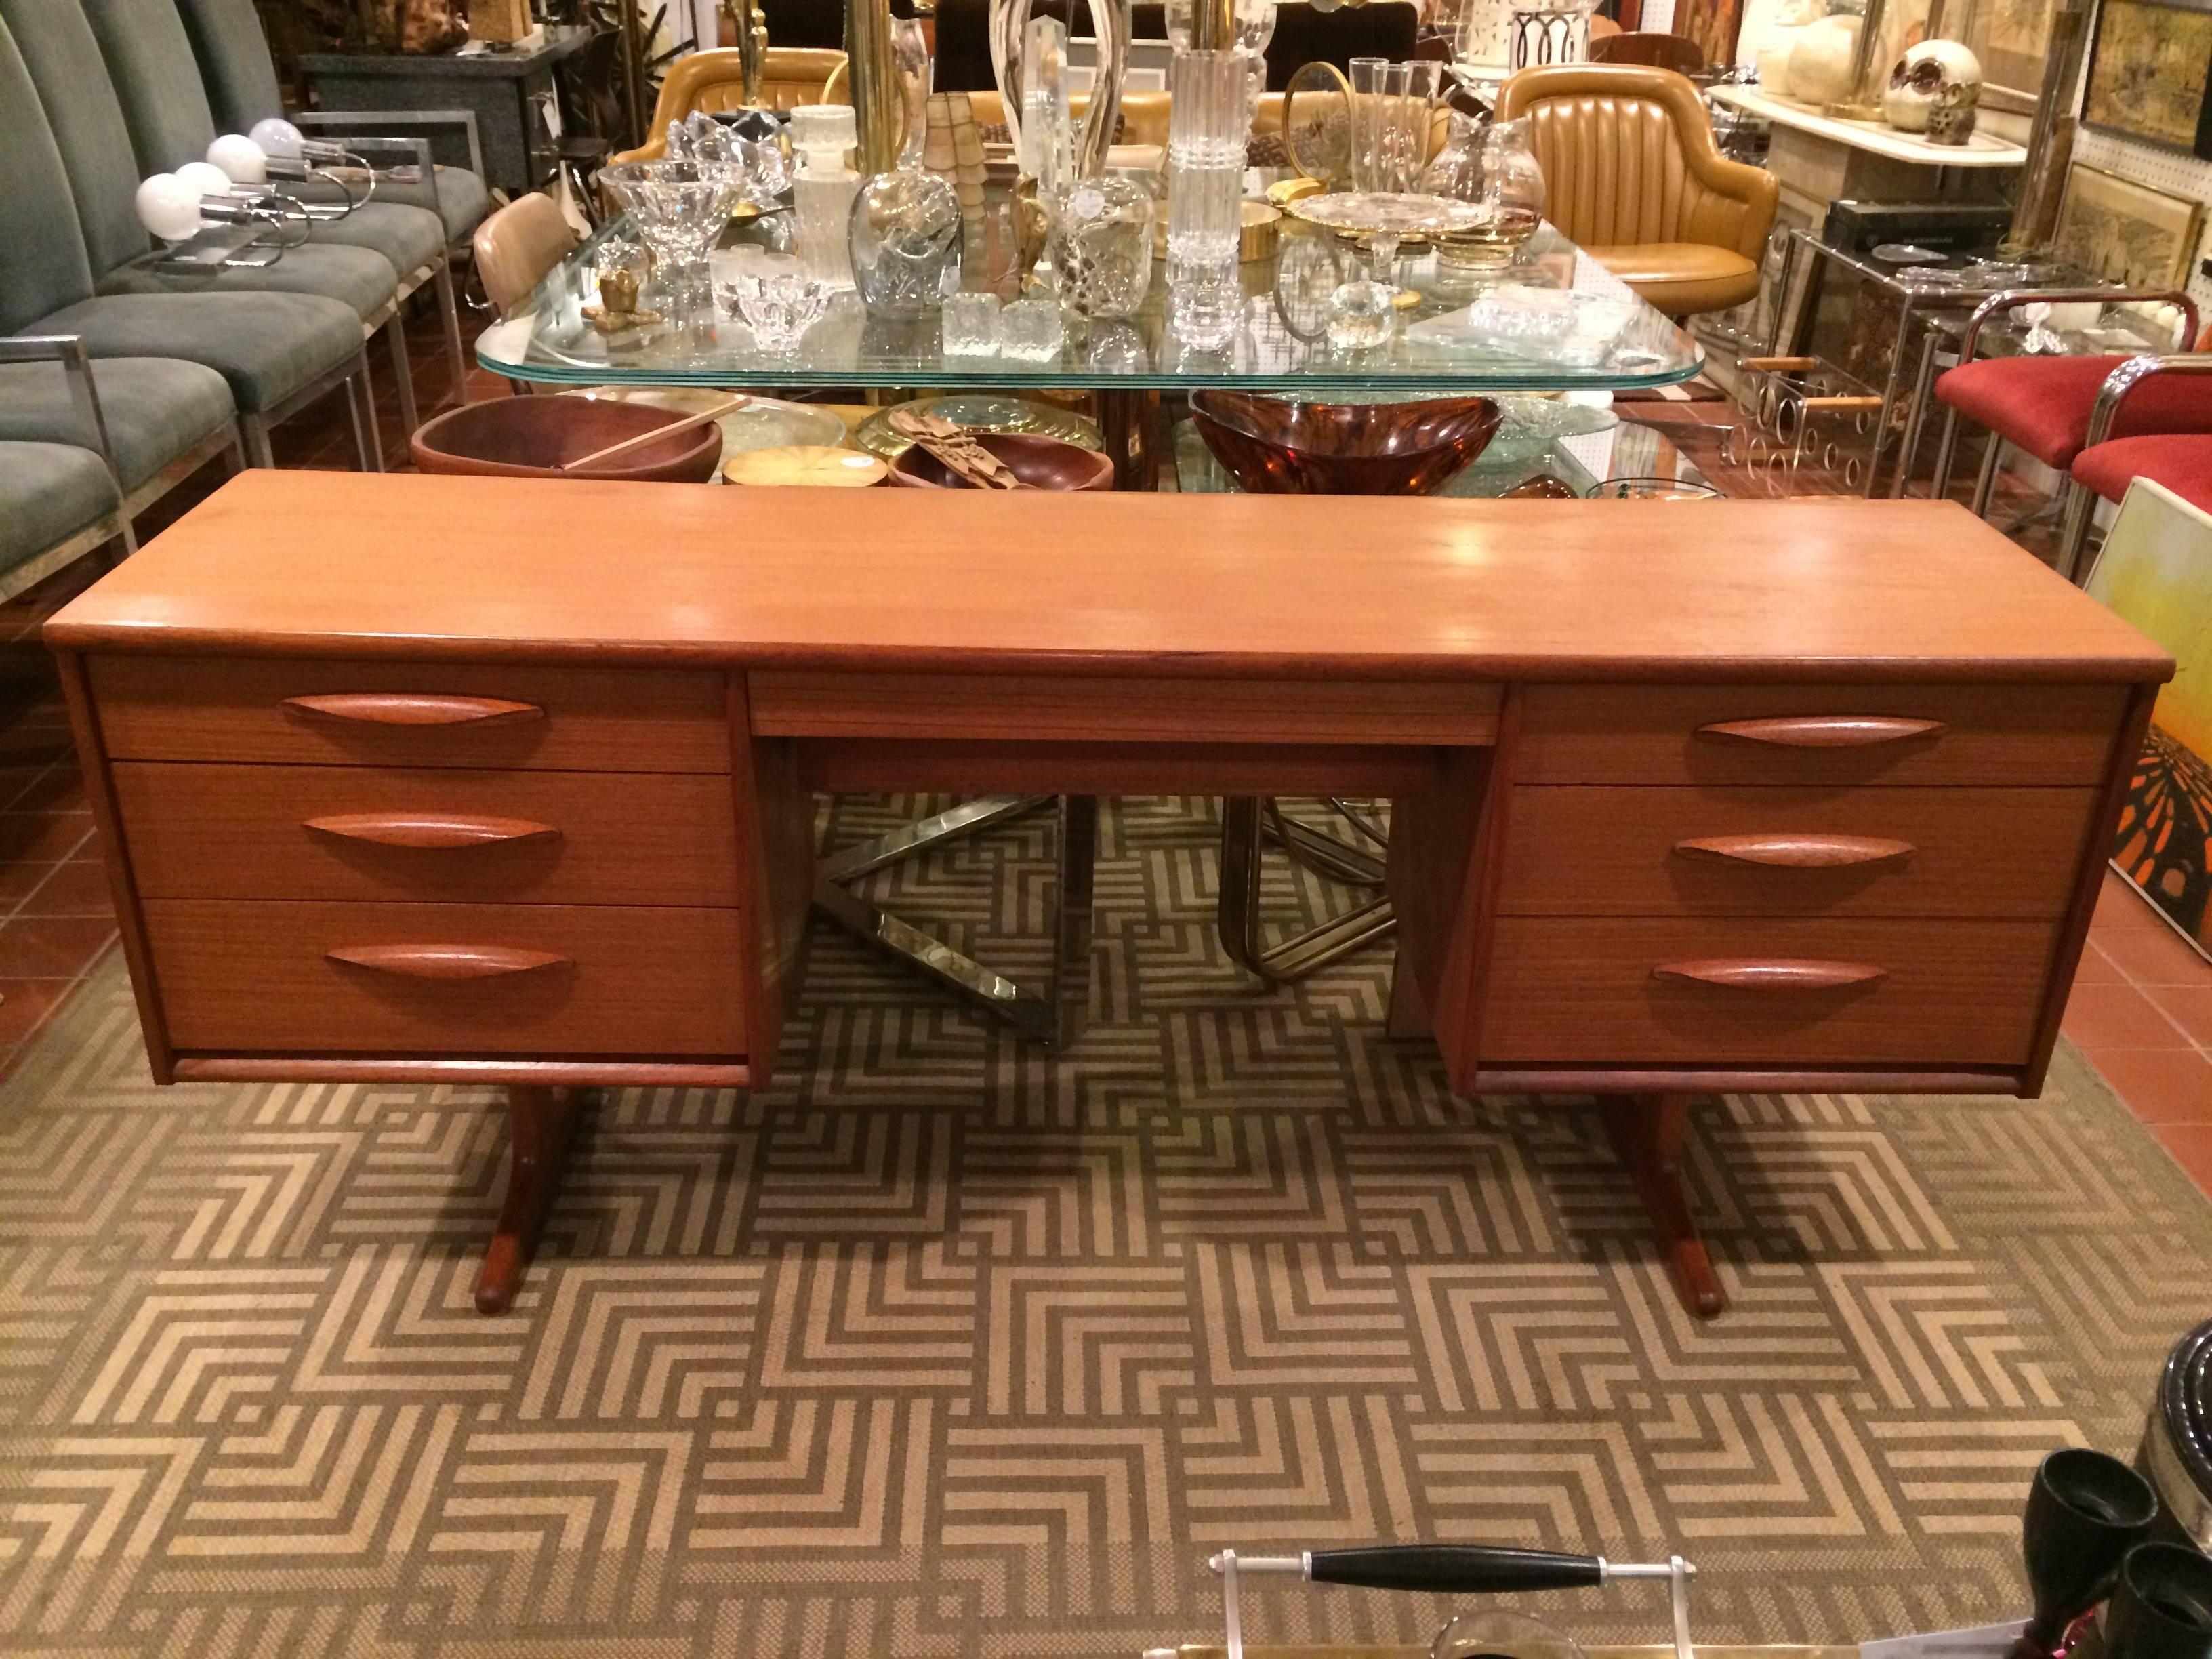 Danish Mid-Century Modern Floating teak desk or vanity. Made up of seven drawers. The center drawer is exceptionally deep with a recessed lower tier.Great for office or dressing room.